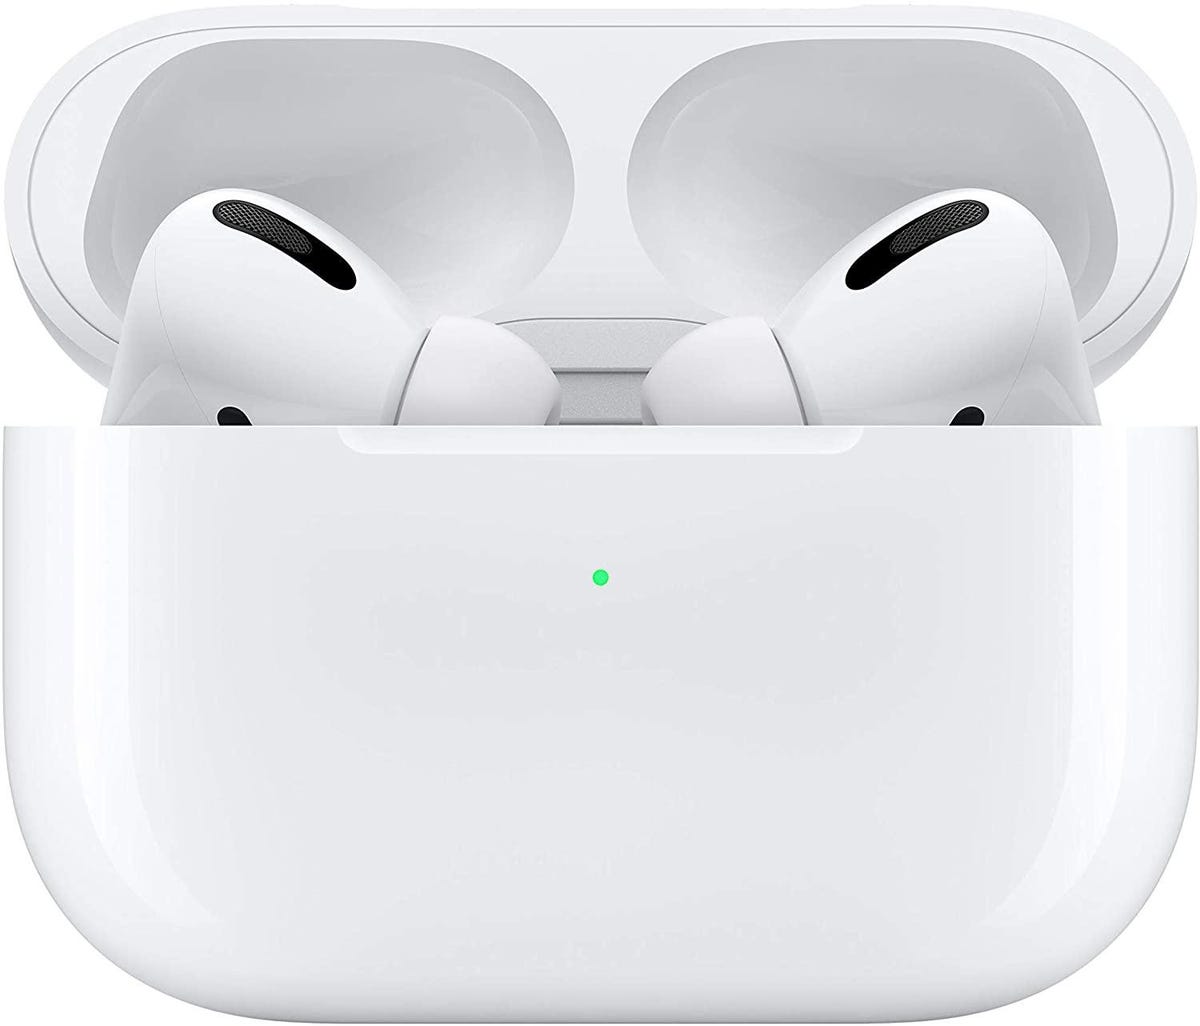 AirPods Pro 2 leak teases stunning innovation... with a spike in its tail

